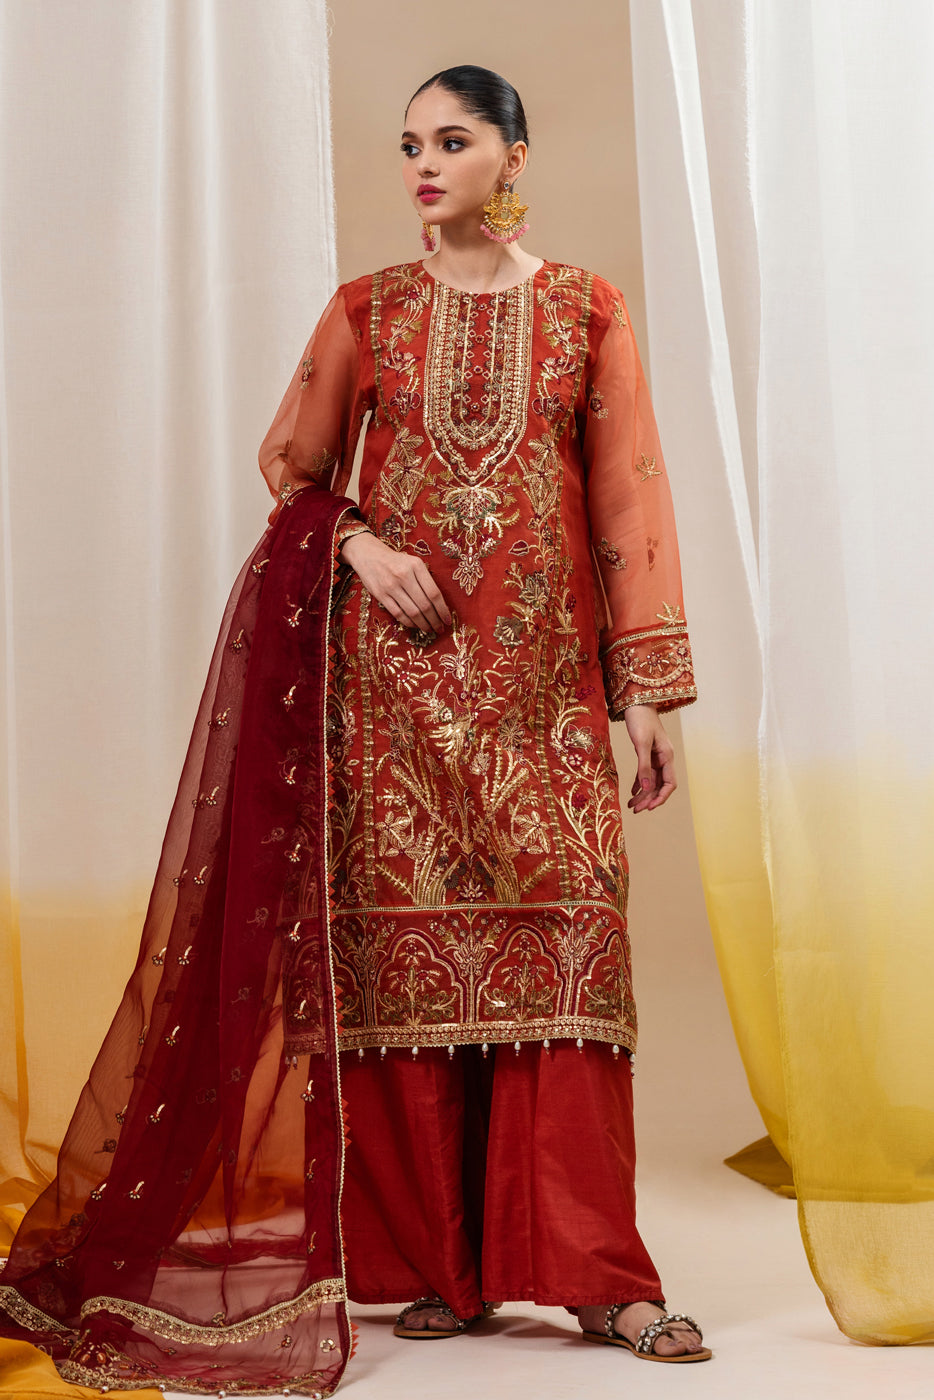 4 PIECE EMBROIDERED ORGANZA SUIT-TANGERINE ROUGE (UNSTITCHED)